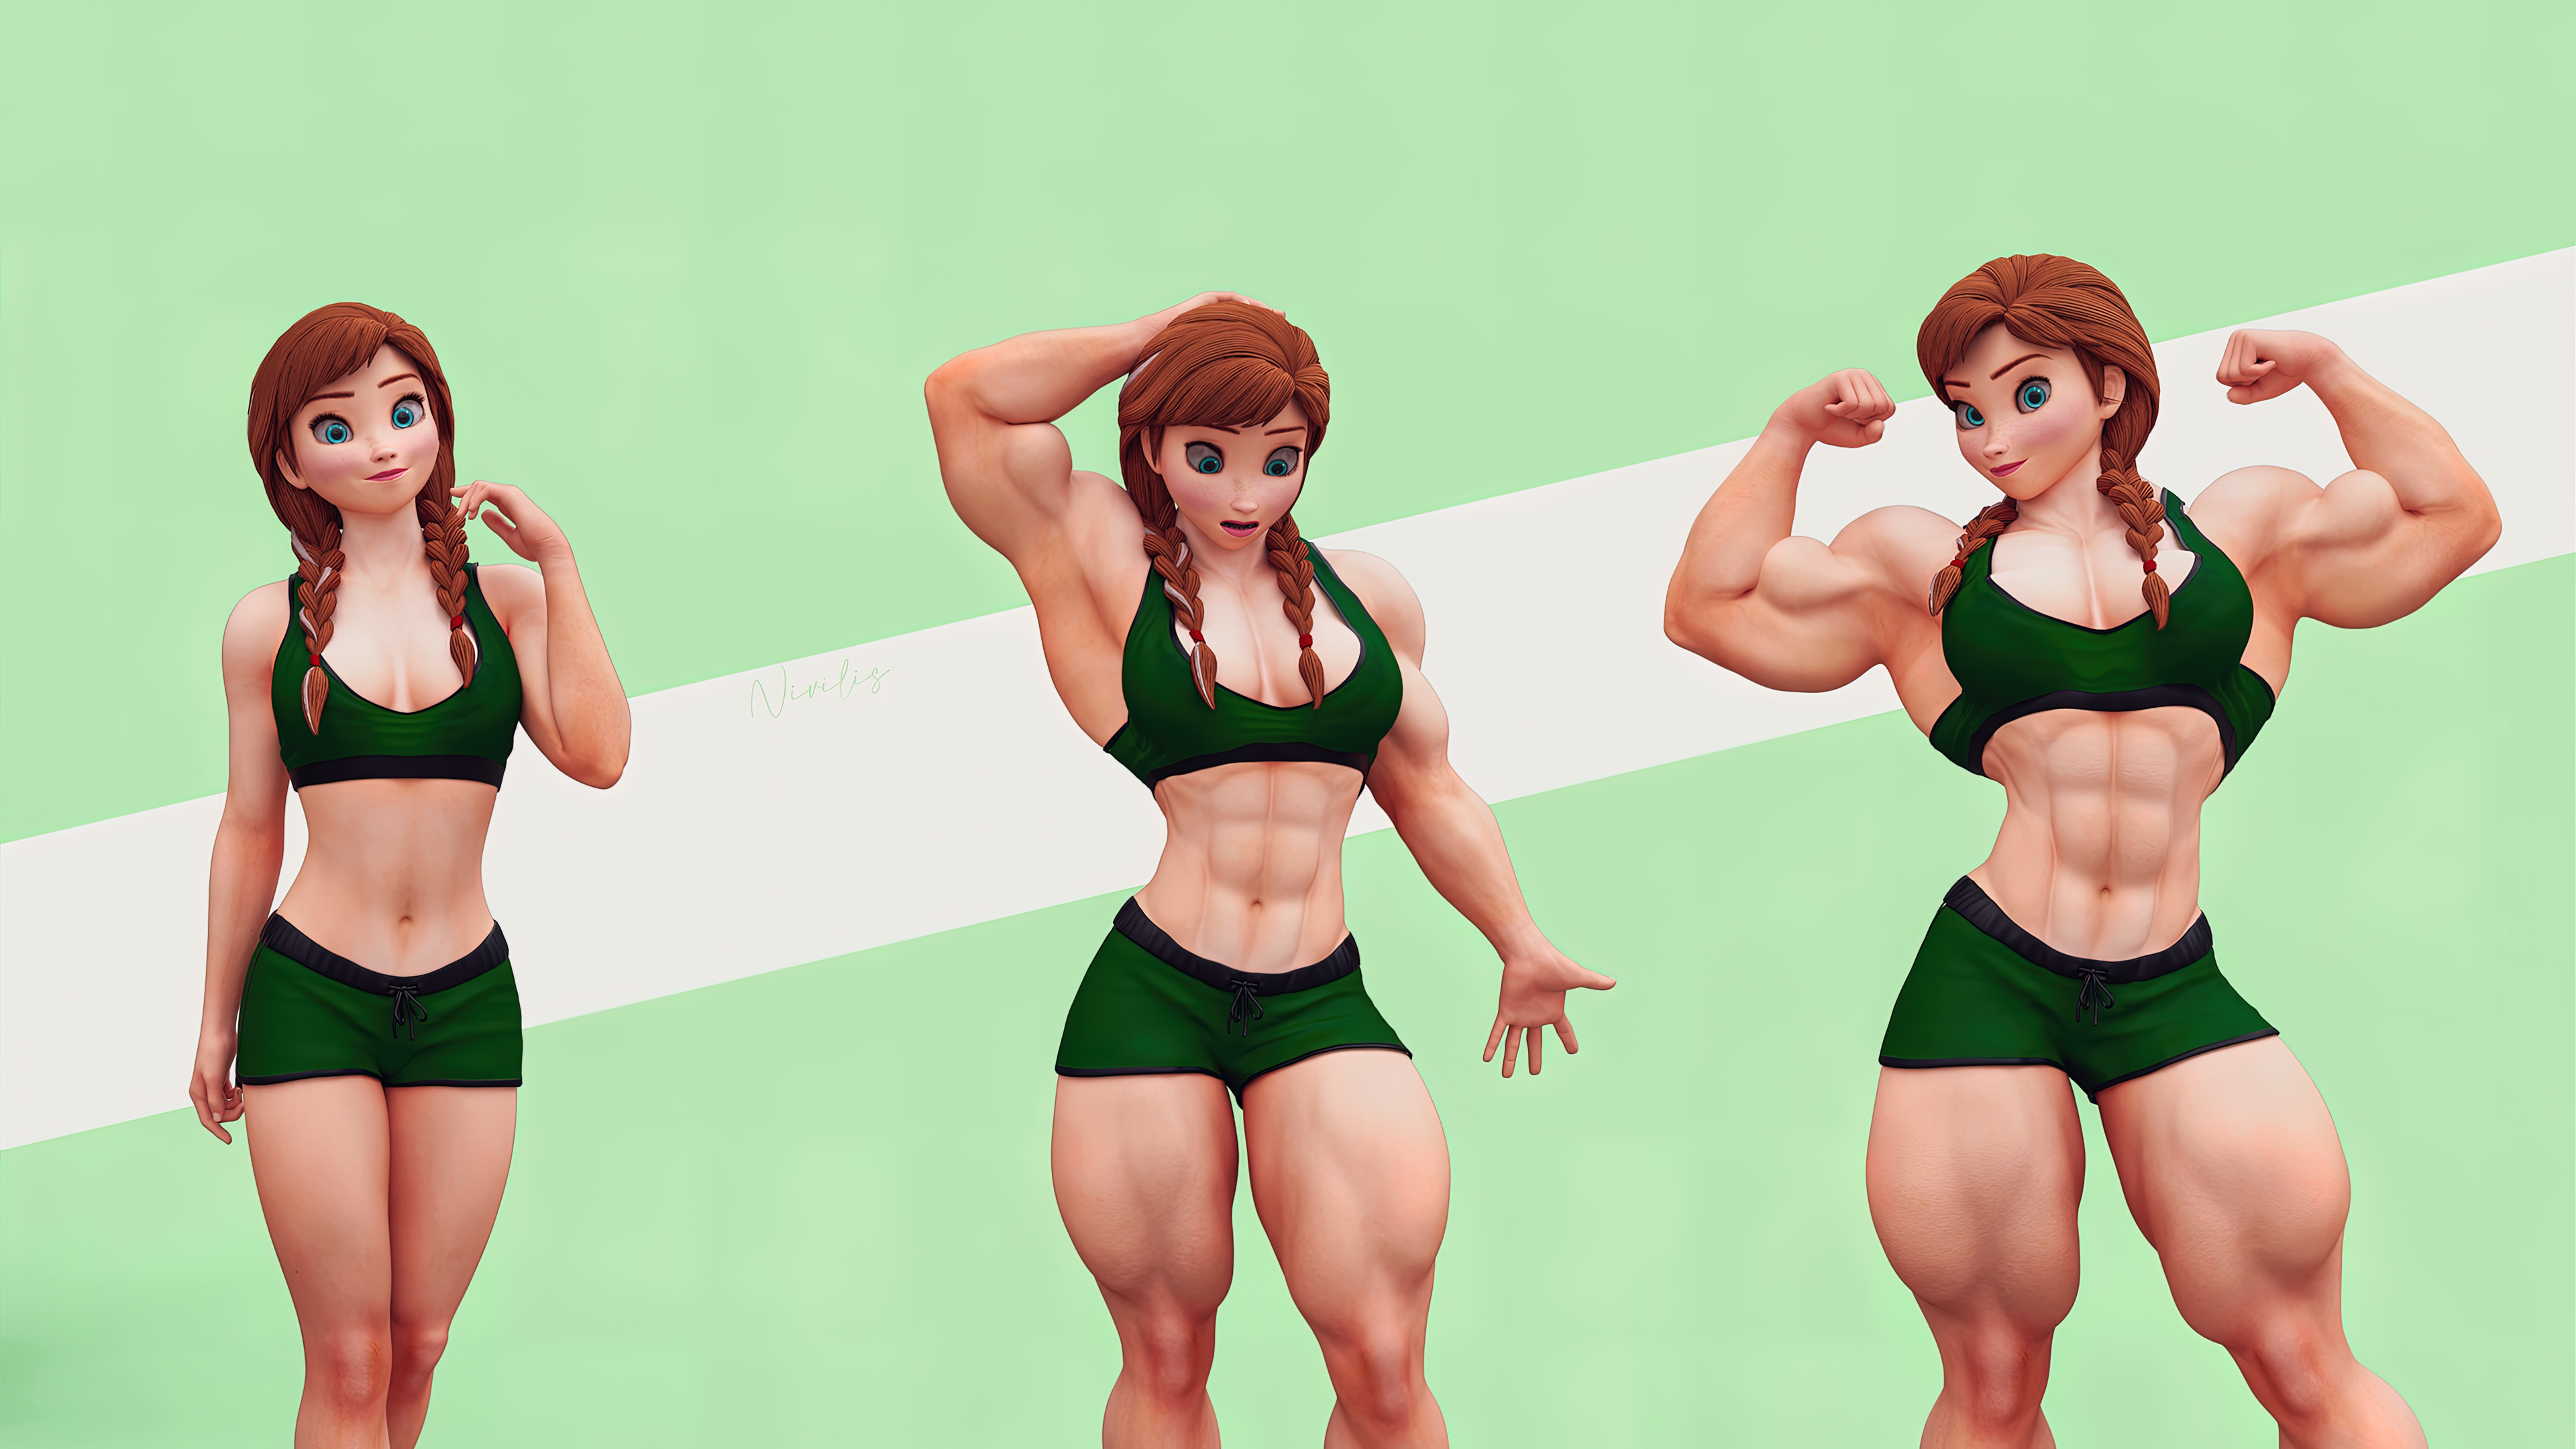 General 3840x2160 strong woman simple background biceps artwork toned female anime girls muscular muscles sports bra shorts braids Princess Anna